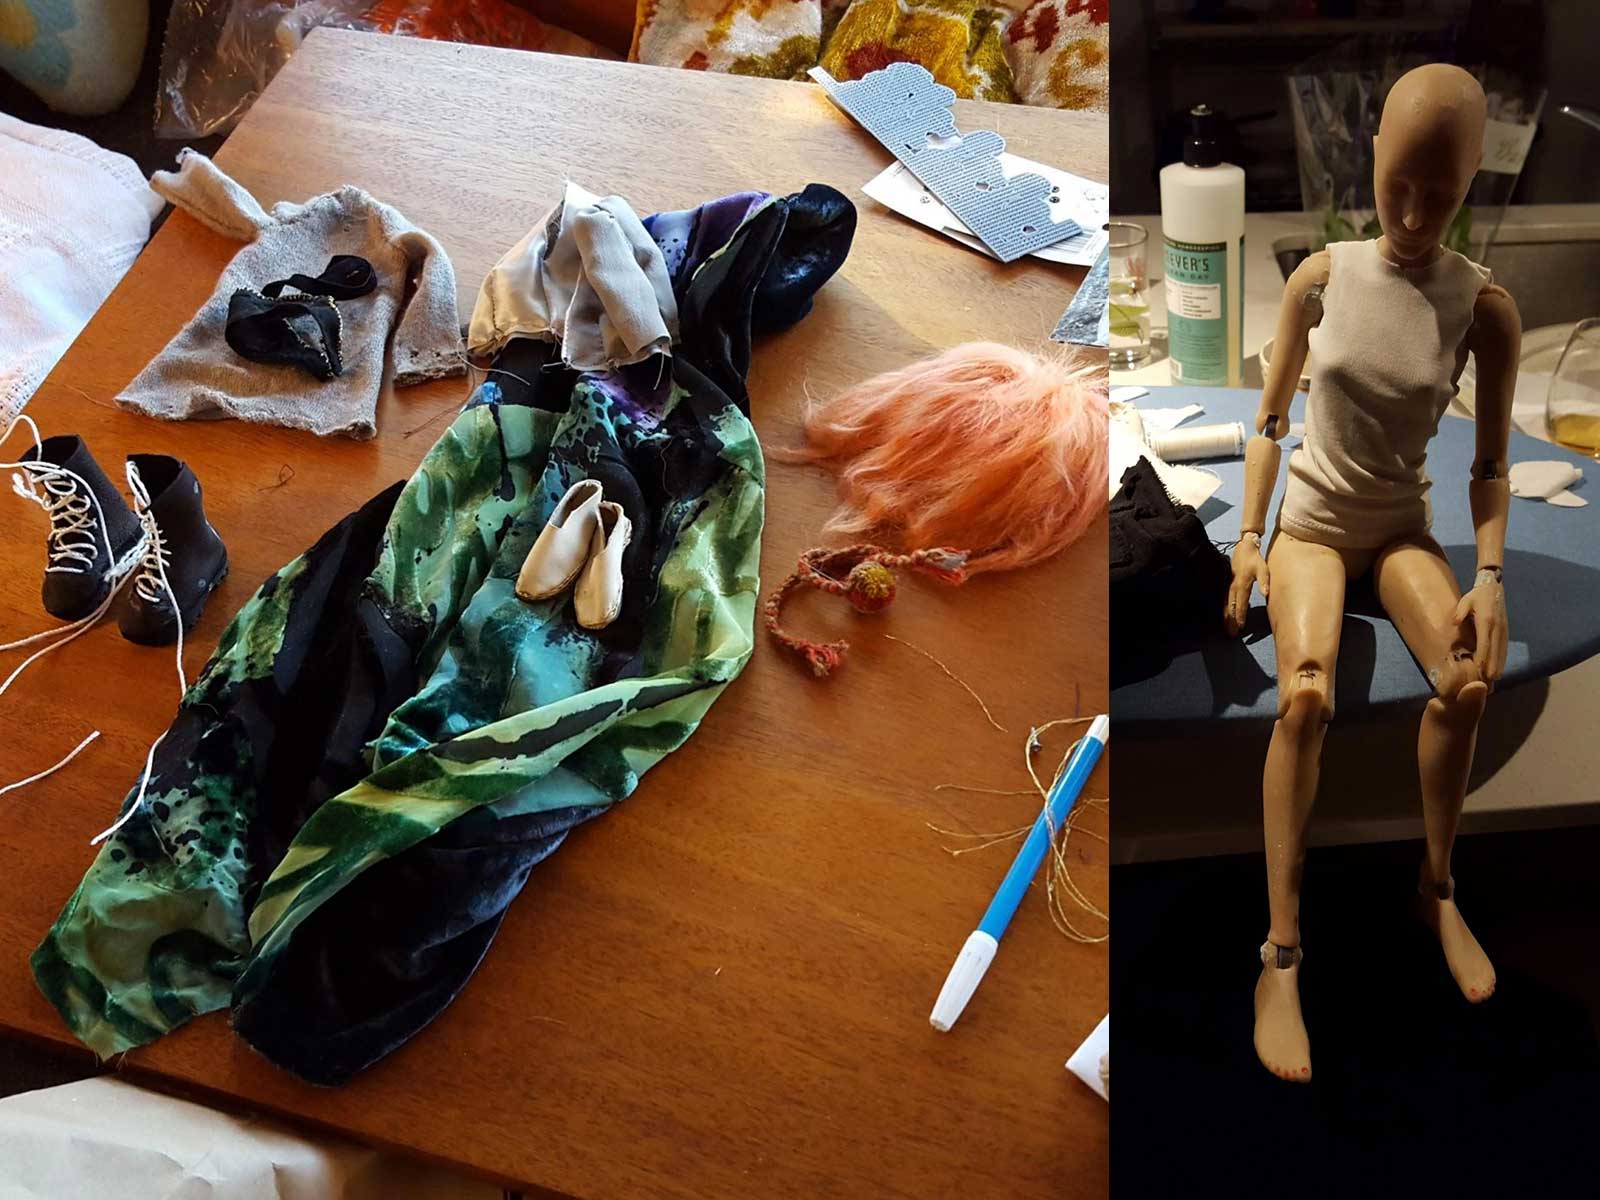 Handsewn doll clothing and shoes on a desk, next to a doll wearing a handsewn tank top.